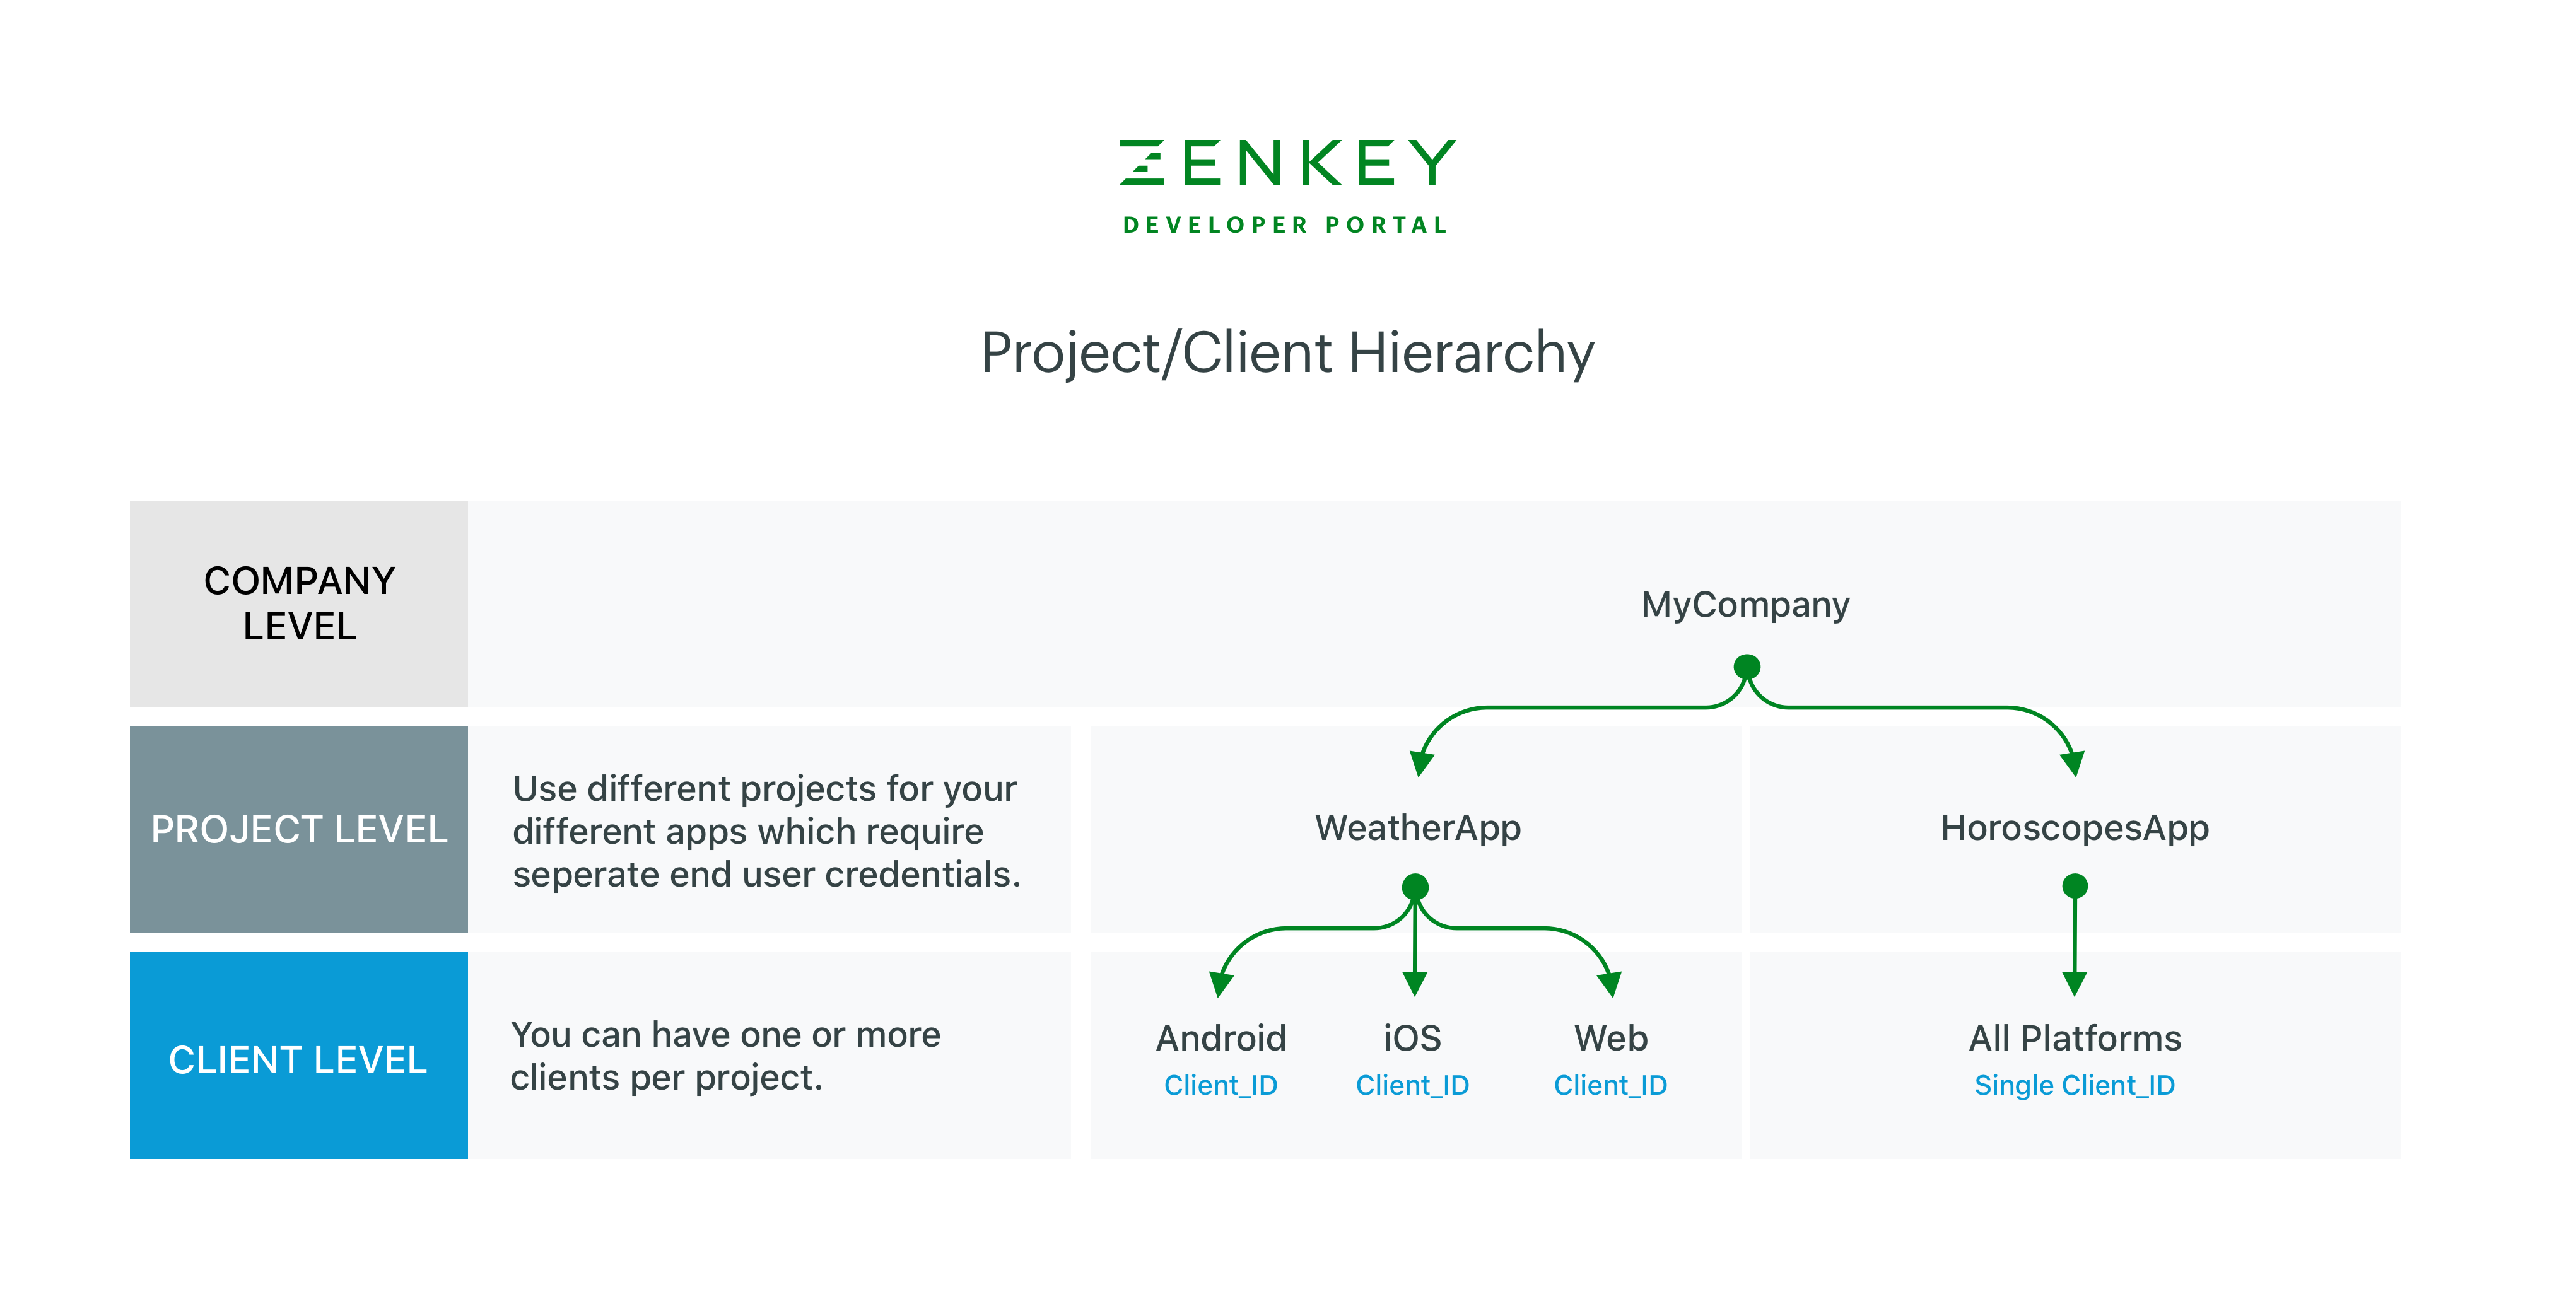 An example of some ways to set up your Project/Client hierarchy